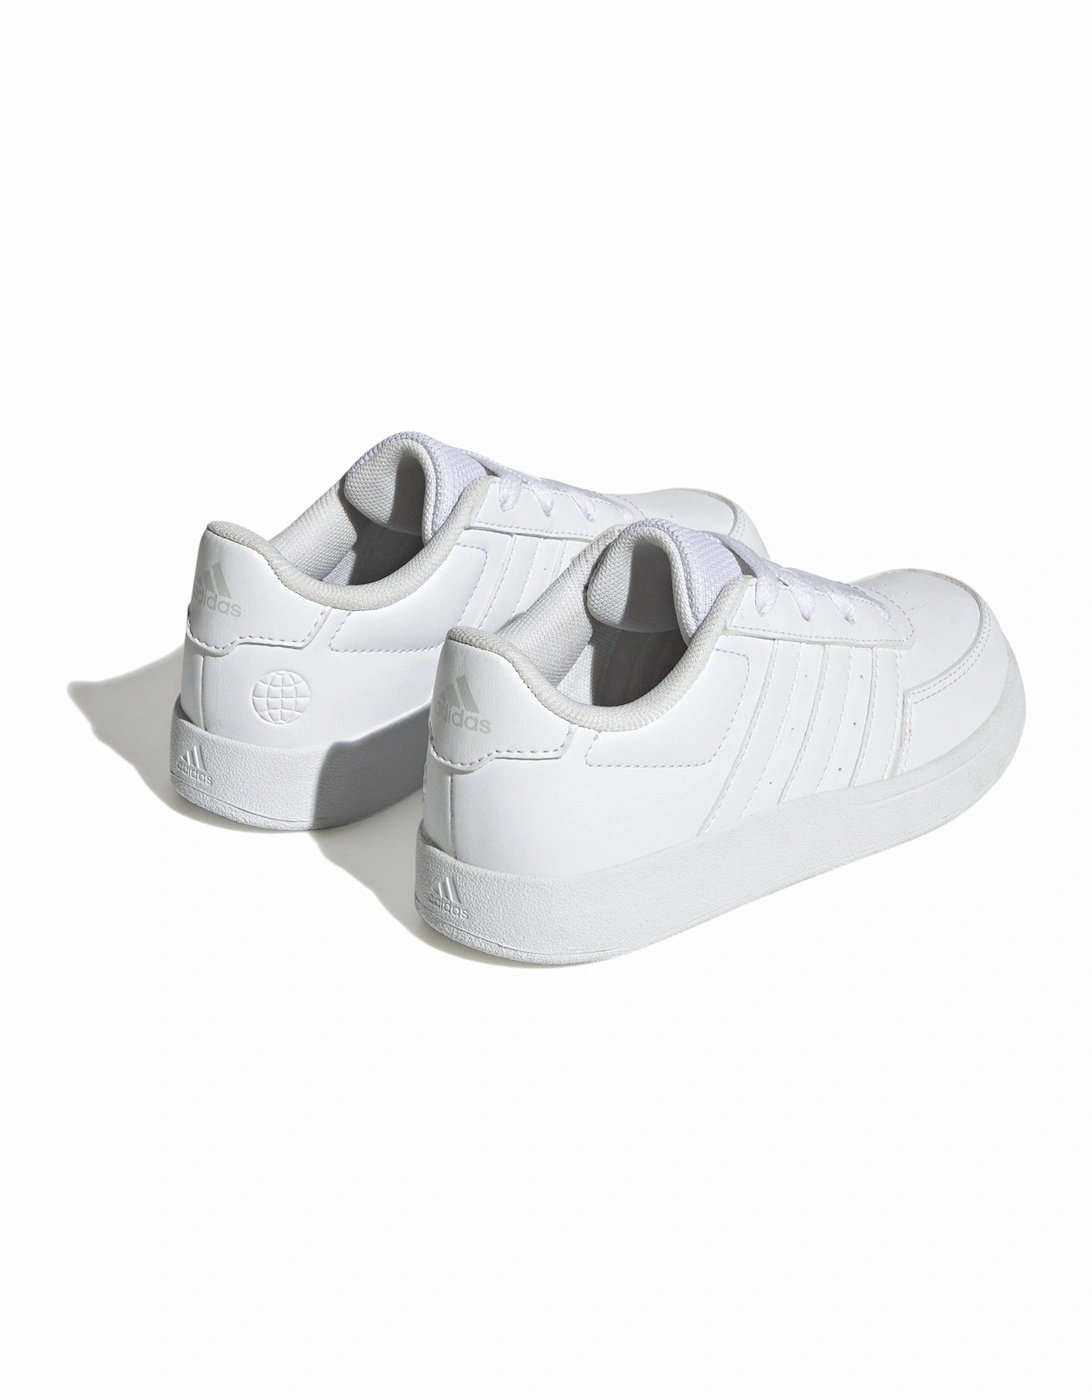 Youths Breaknet 2.0 Trainers (White)